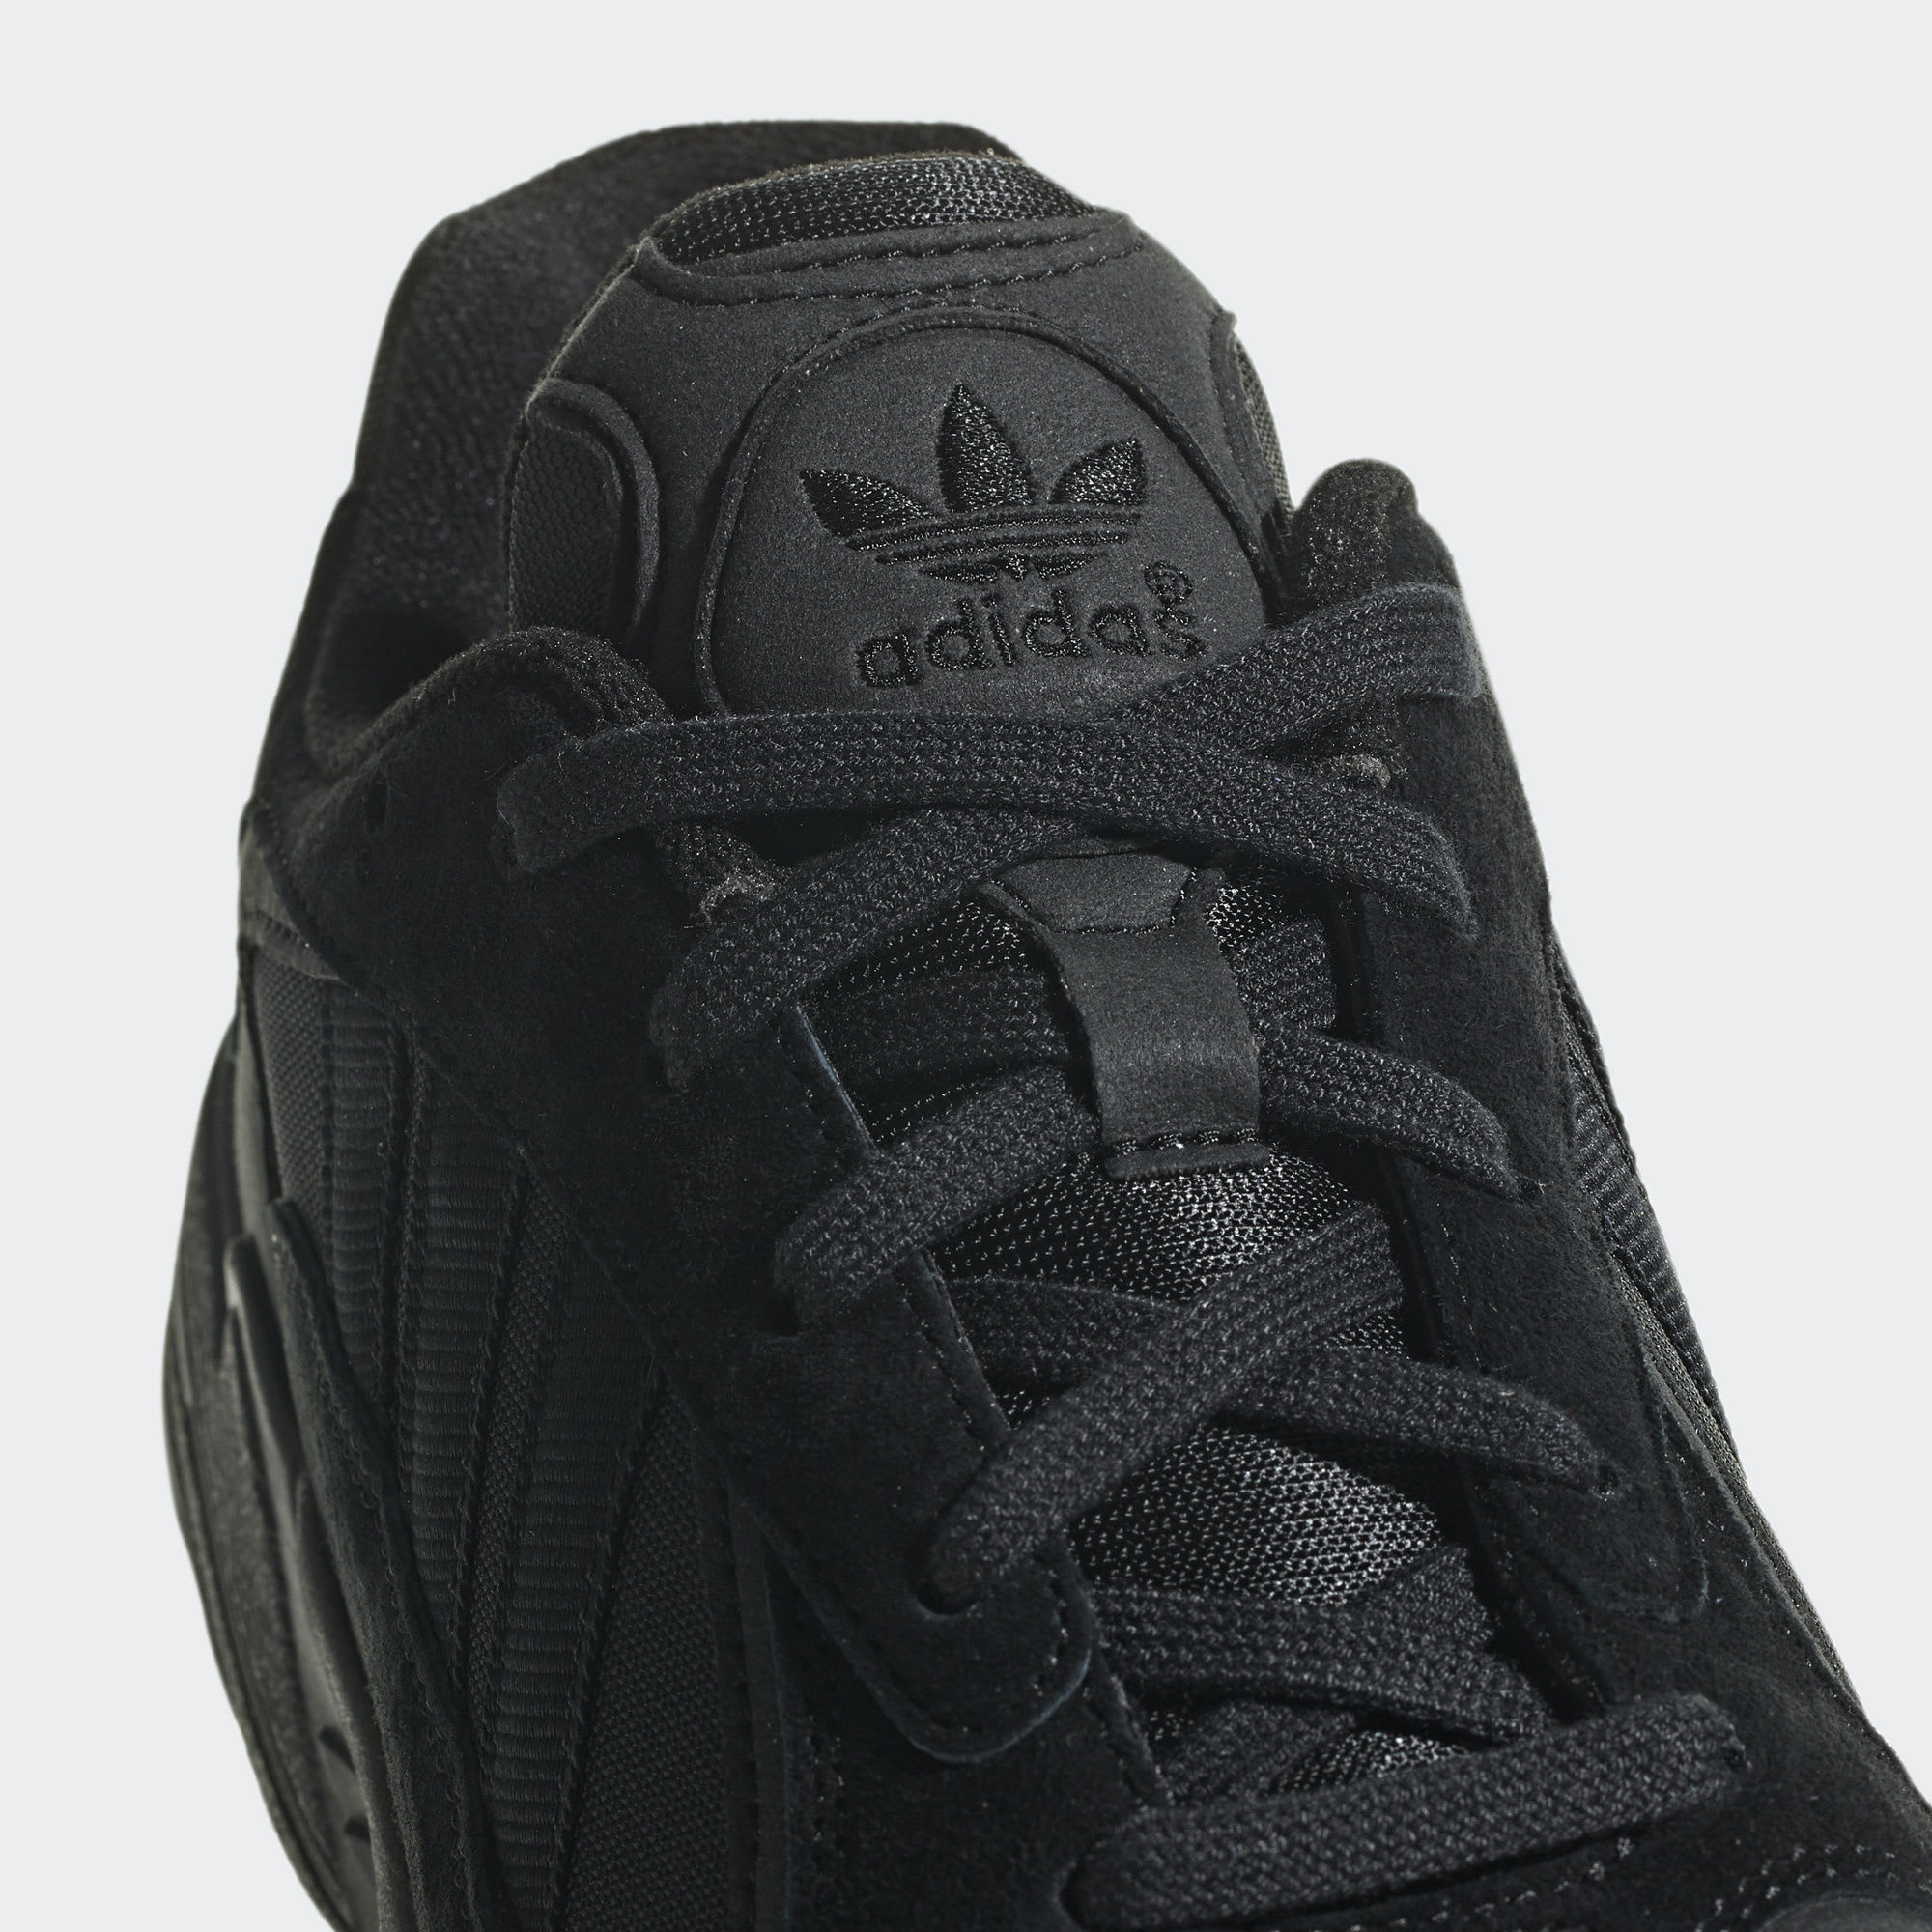 Adidas Yung-1 Triple Black Release Date G27026 Tongue